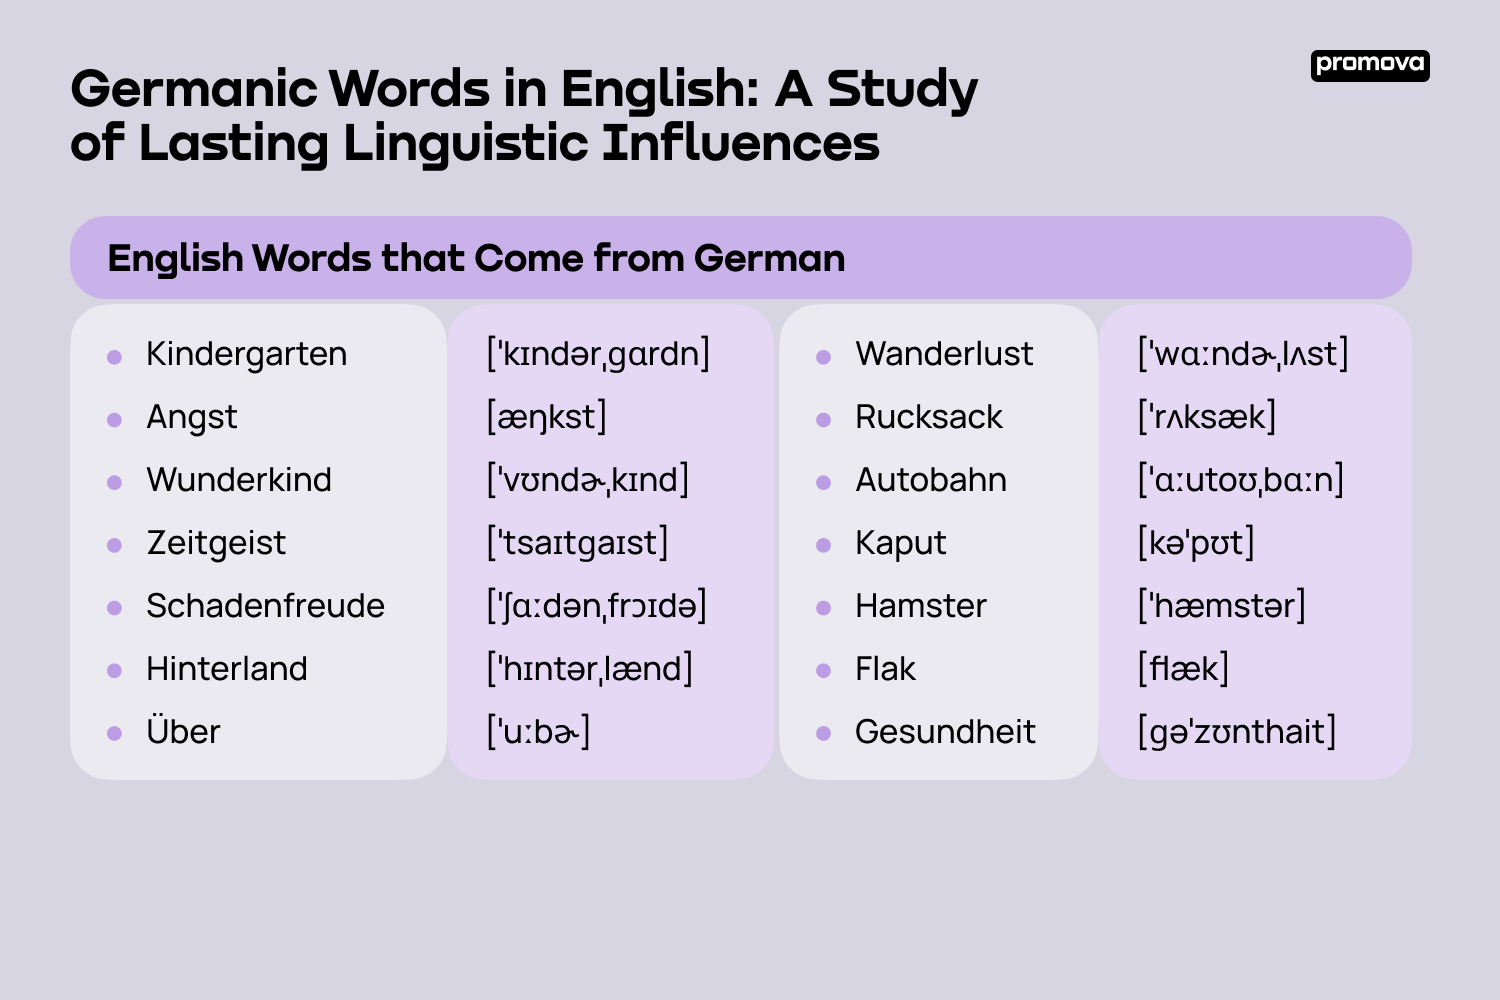 Exploring English Words that Come from German